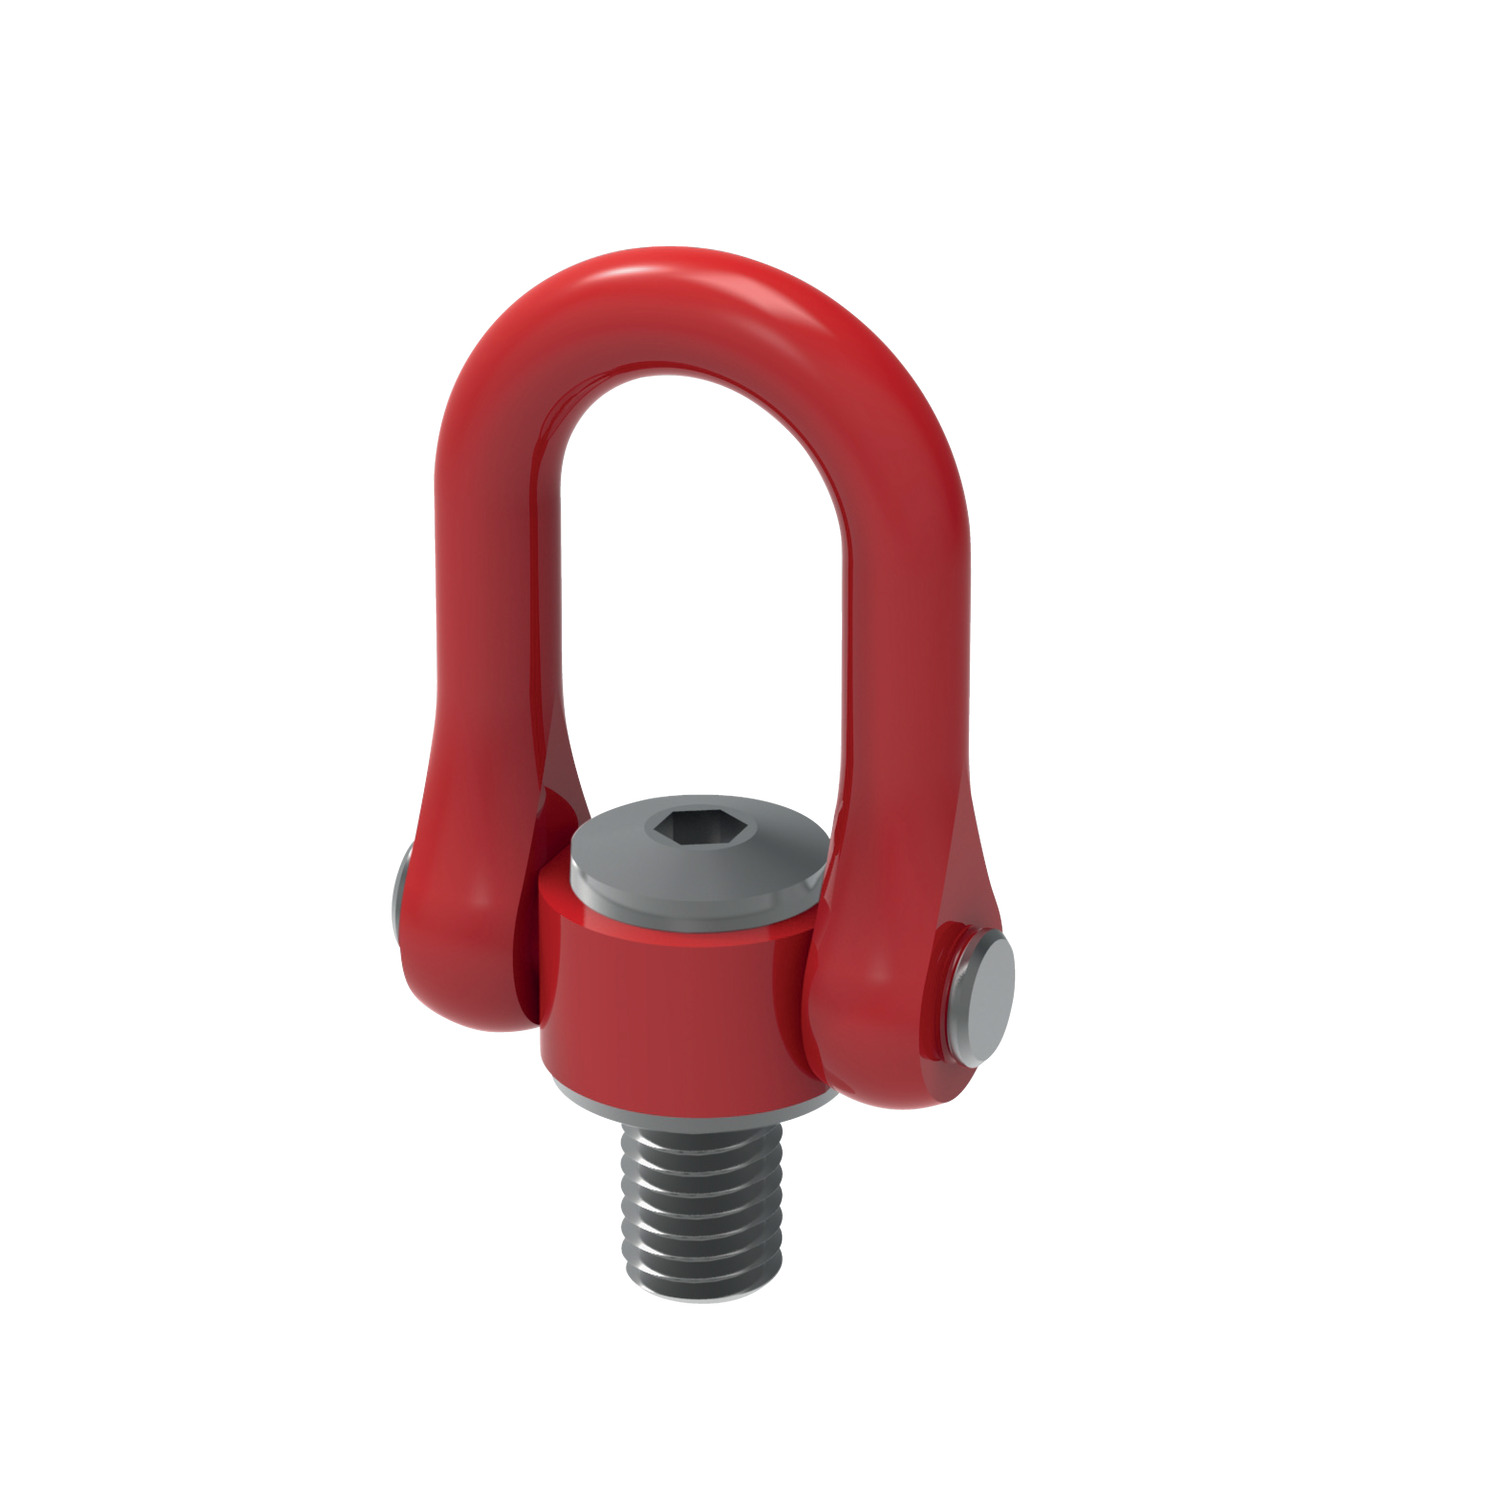 Mega Double Swivel Shackles  Male Ultra heavy duty double swivel lifting rings. M64 to M100 and for loads up to 50 tons per ring.